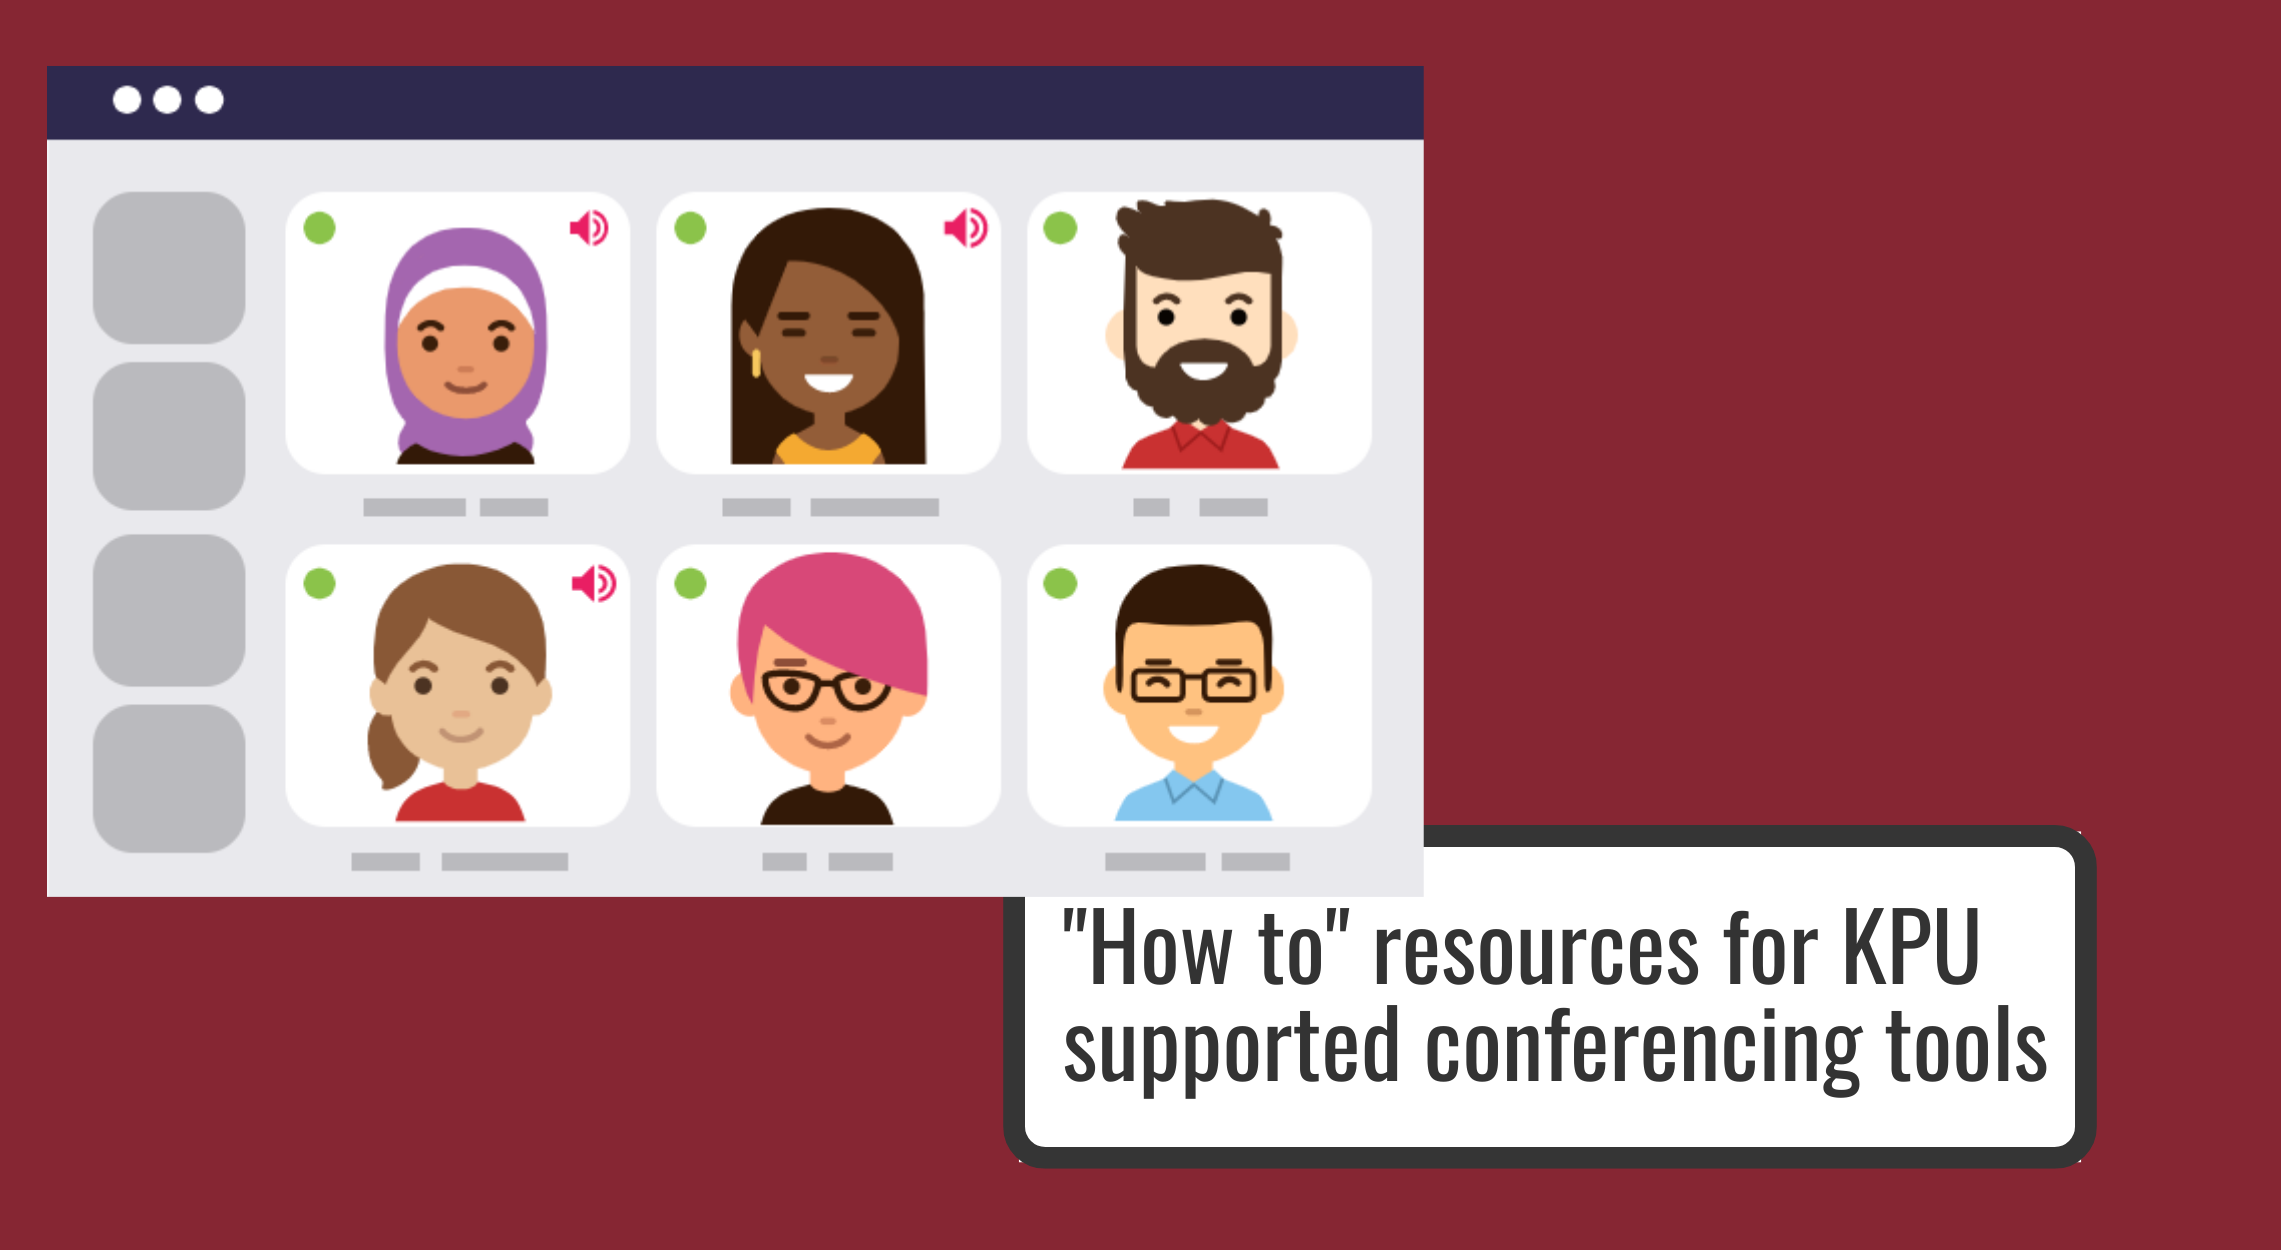 An illustration of a virtual meeting in a conferencing space with 6 images of people depicted on the screen. A caption reads "How to" resources for KPU supported conferencing tools